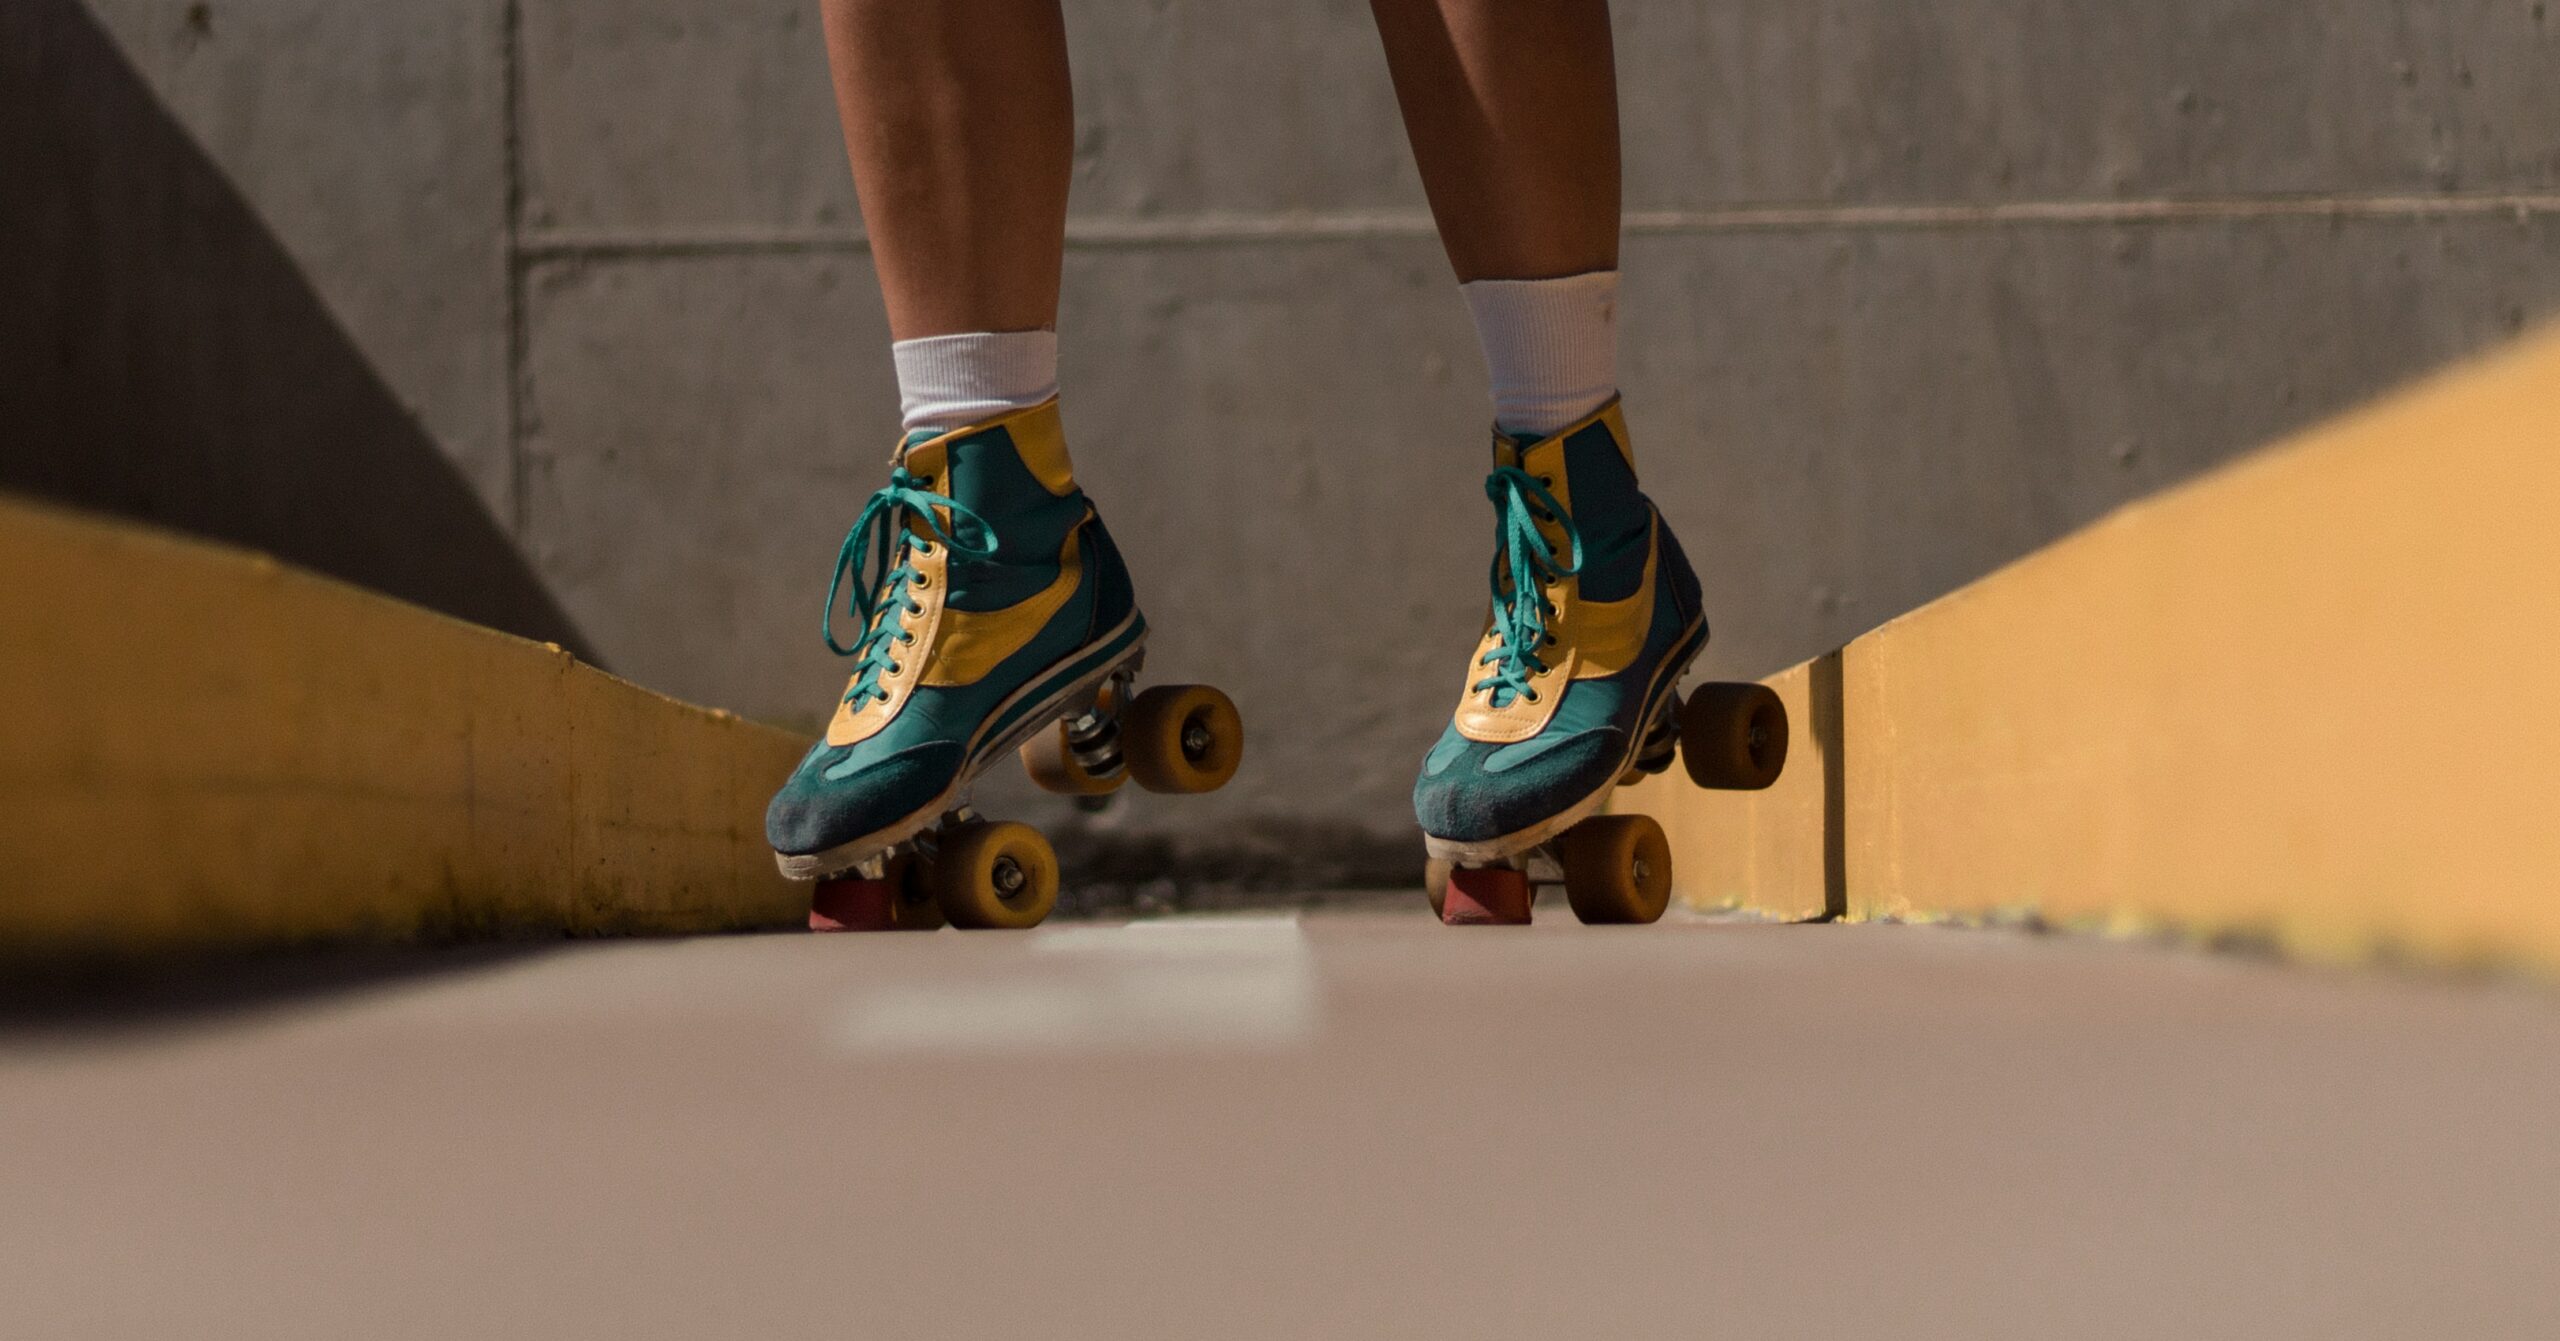 A photo of a person of color in roller skates. No clear location of where the photo was taken.